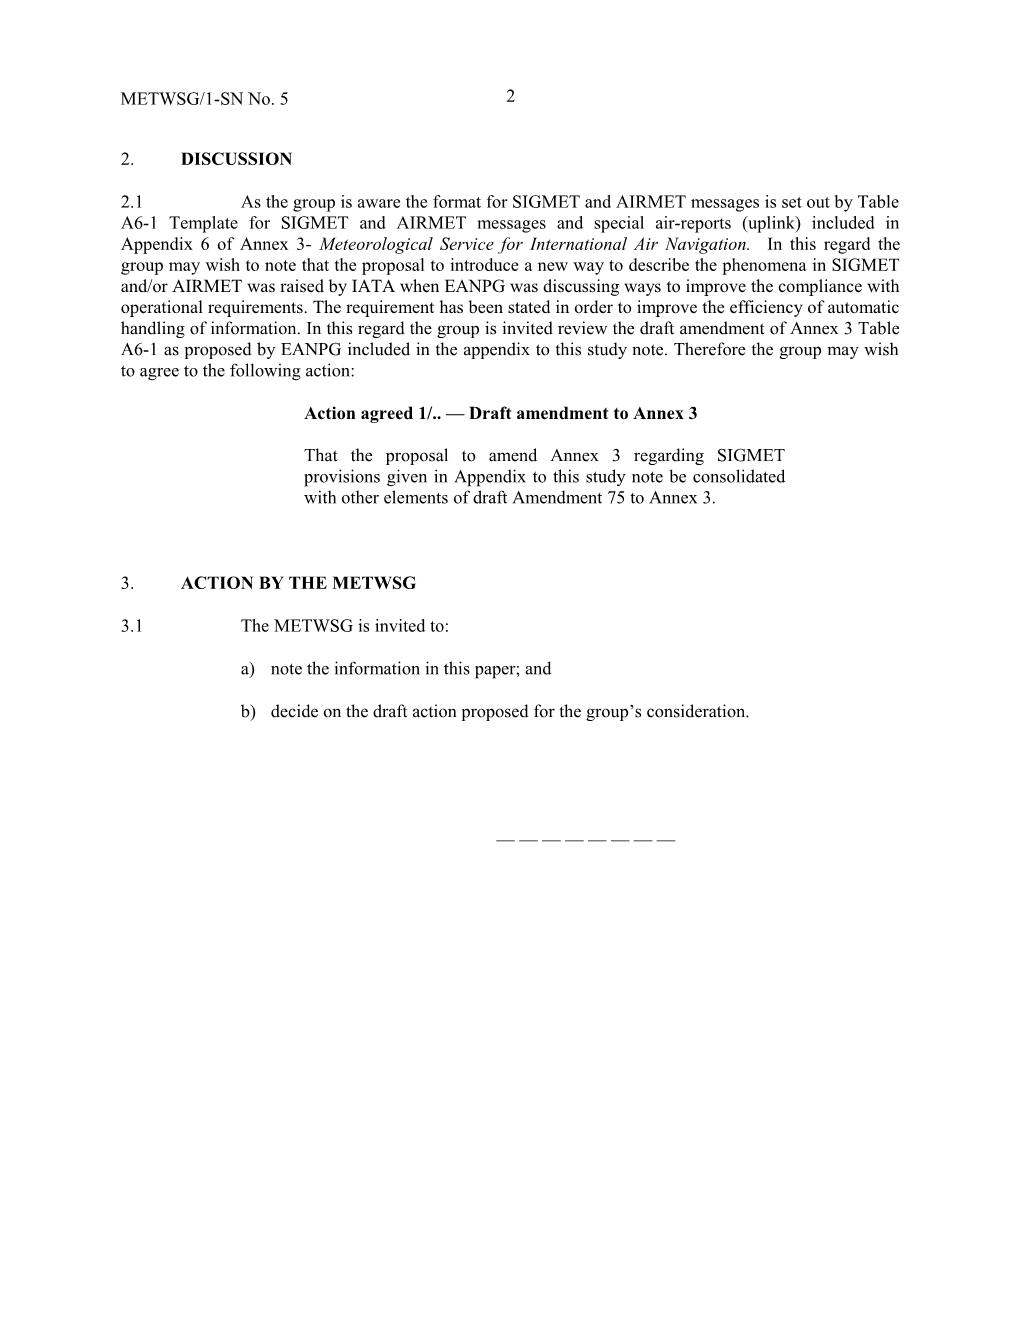 Amendment to the Template for Sigmet and Airmet